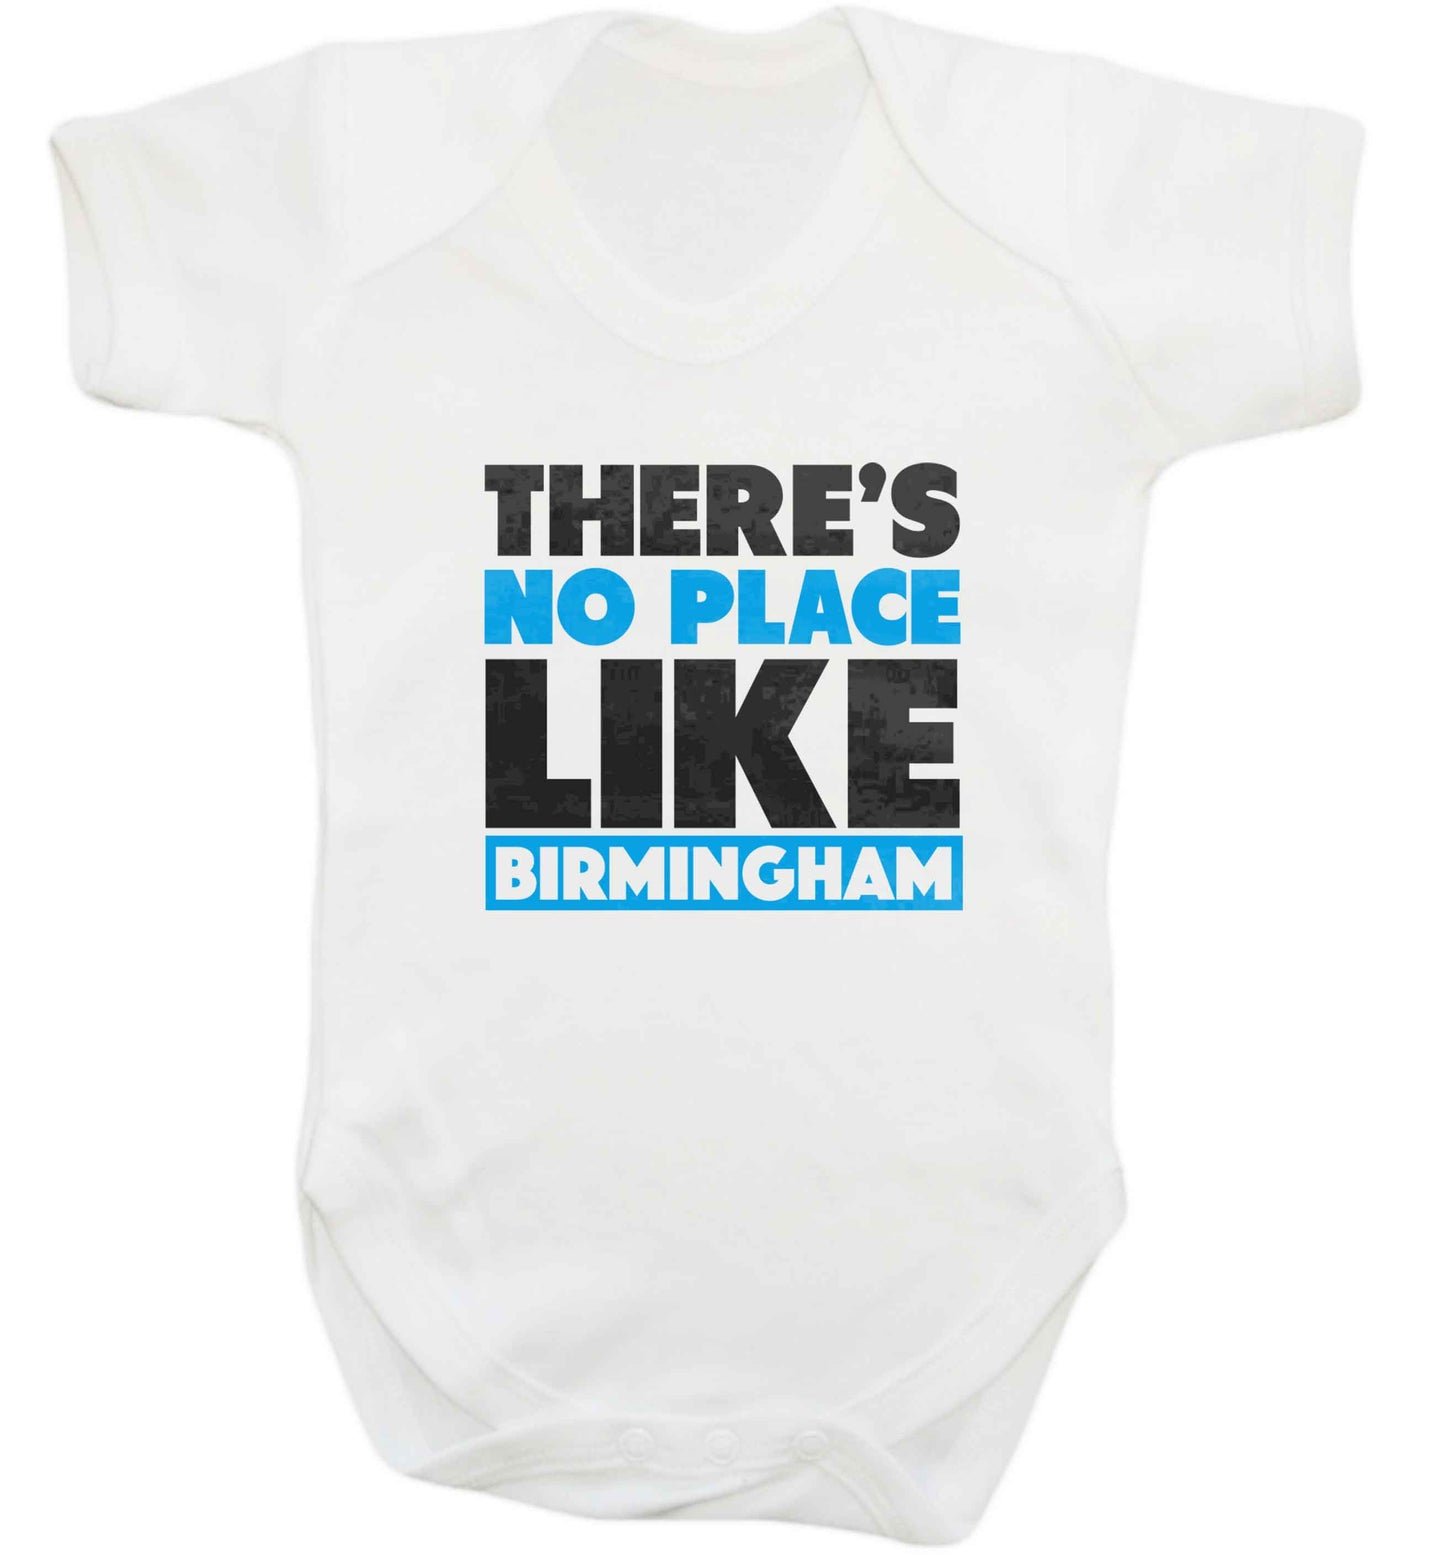 There's no place like Birmingham baby vest white 18-24 months